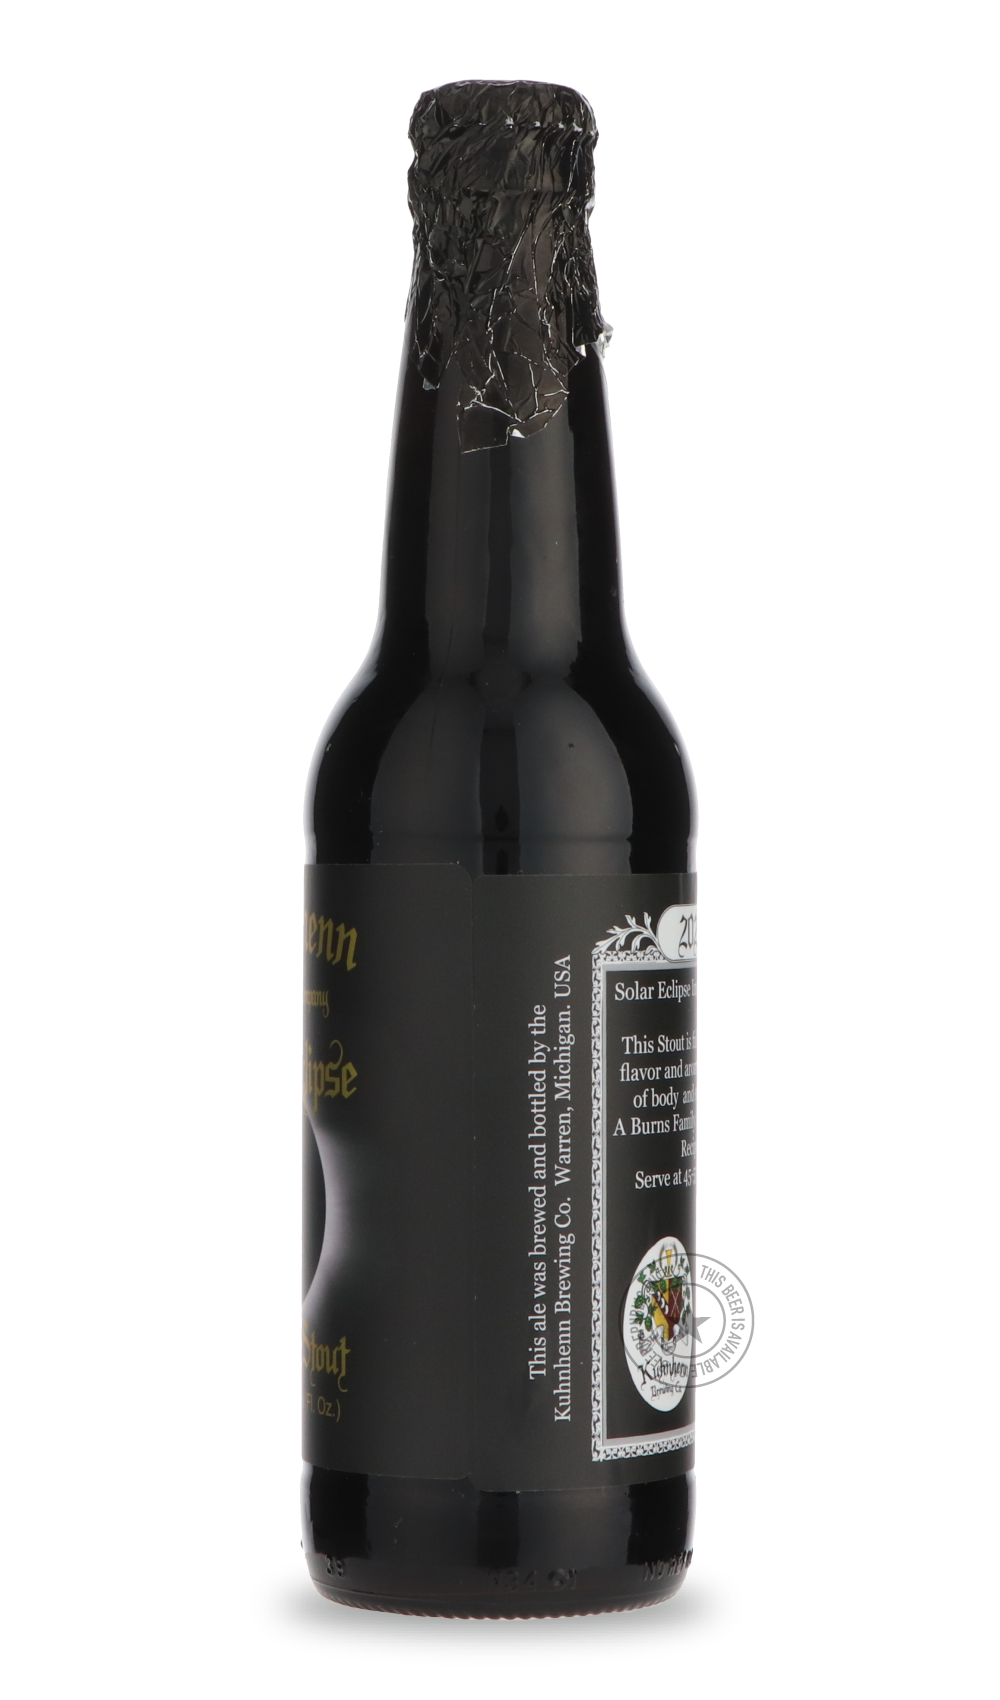 -Kuhnhenn- Solar Eclipse (2022)-Stout & Porter- Only @ Beer Republic - The best online beer store for American & Canadian craft beer - Buy beer online from the USA and Canada - Bier online kopen - Amerikaans bier kopen - Craft beer store - Craft beer kopen - Amerikanisch bier kaufen - Bier online kaufen - Acheter biere online - IPA - Stout - Porter - New England IPA - Hazy IPA - Imperial Stout - Barrel Aged - Barrel Aged Imperial Stout - Brown - Dark beer - Blond - Blonde - Pilsner - Lager - Wheat - Weizen 